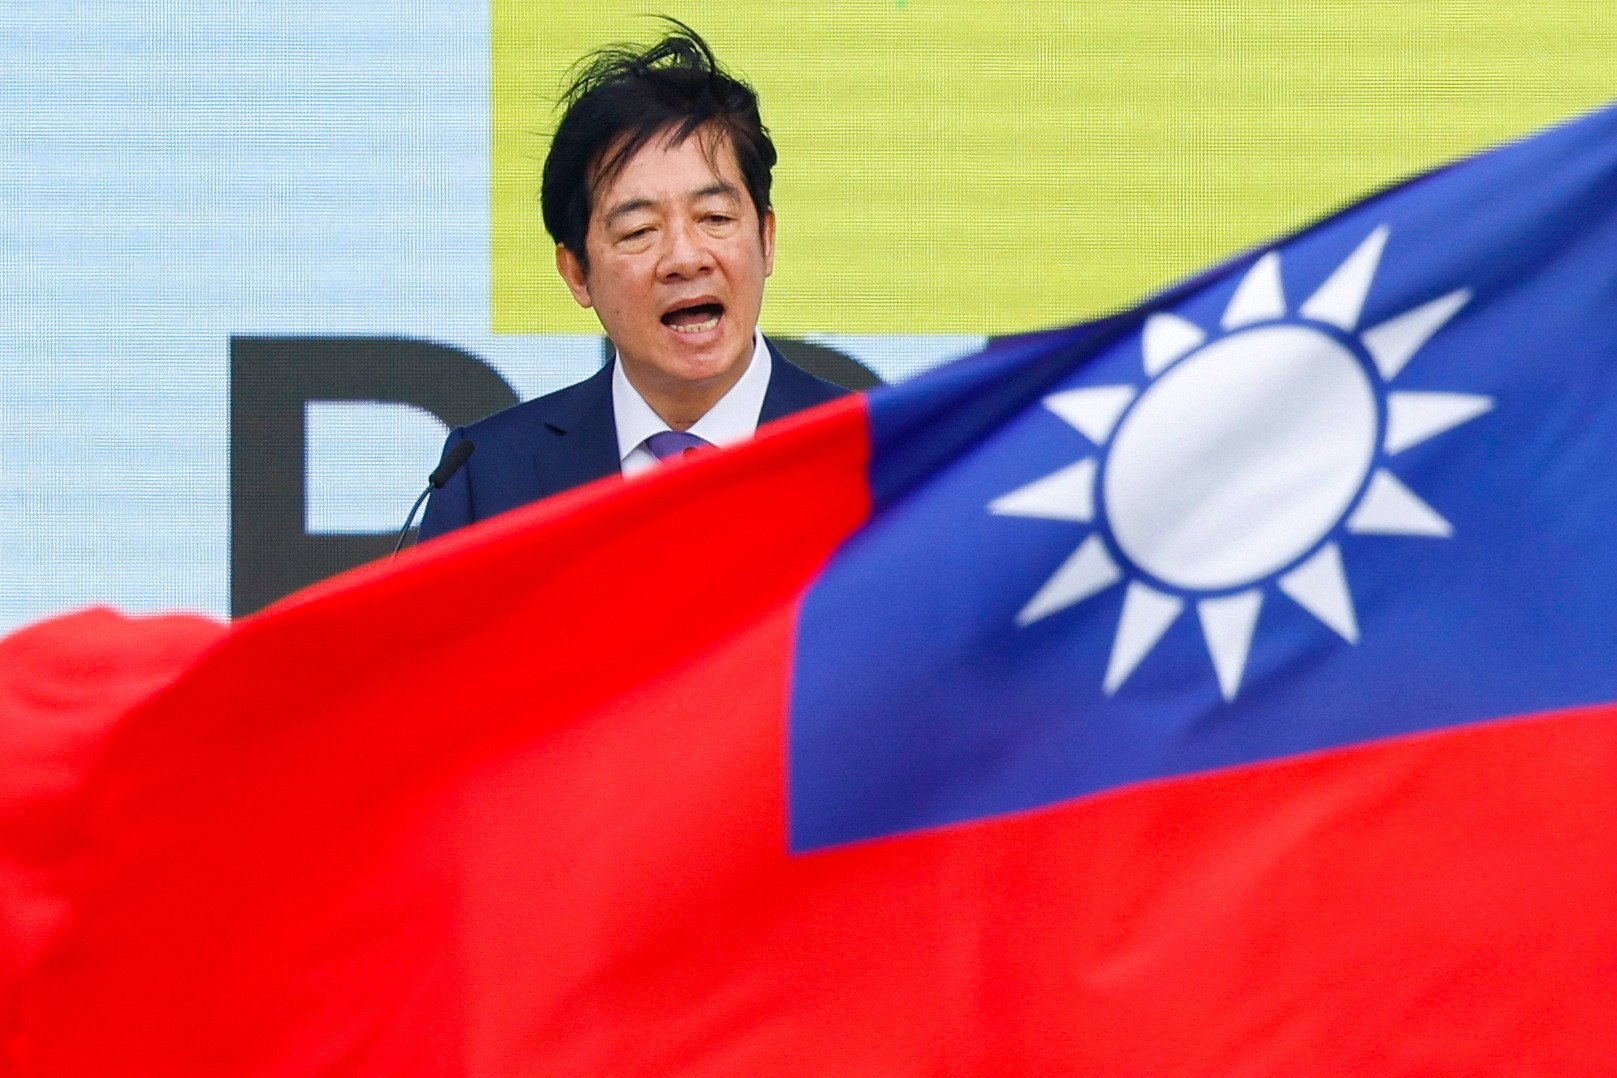 Mainland state media have taken aim at Taiwanese President William Lai’s inauguration speech. Photo: Reuters